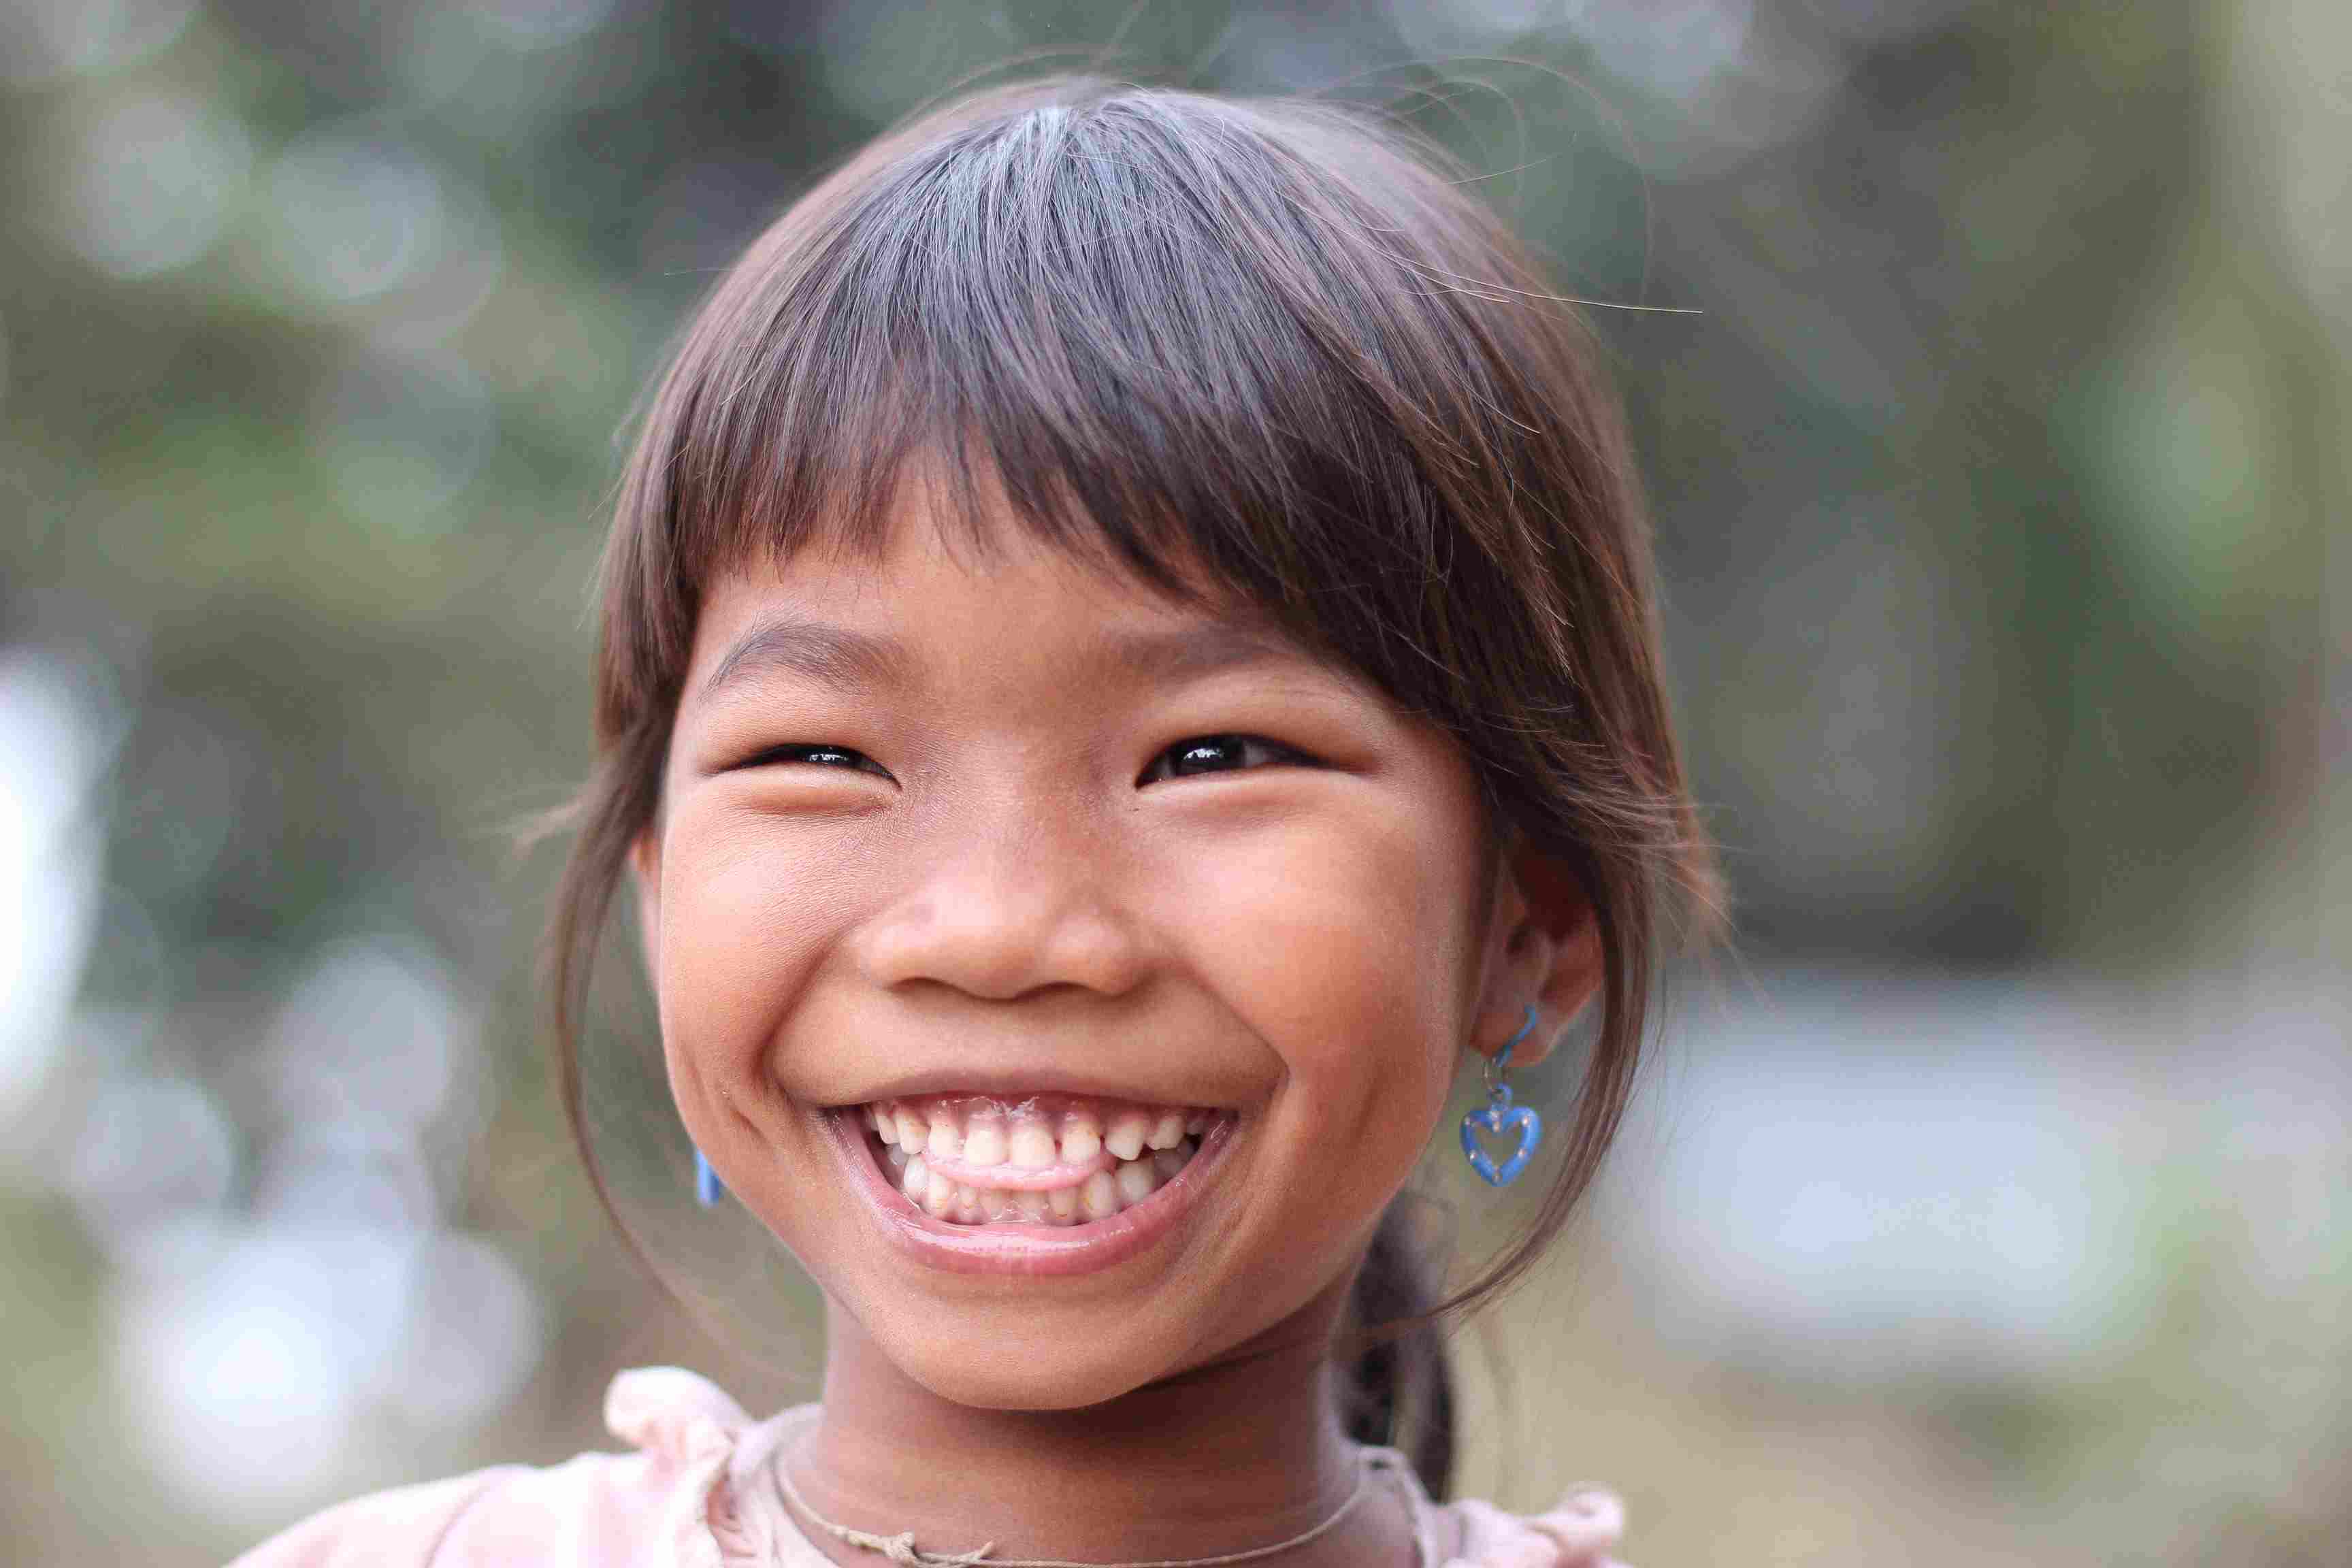 Images Wikimedia Commons/23 Basile Morin Lao_little_girl_laughing_with_teeth.jpg